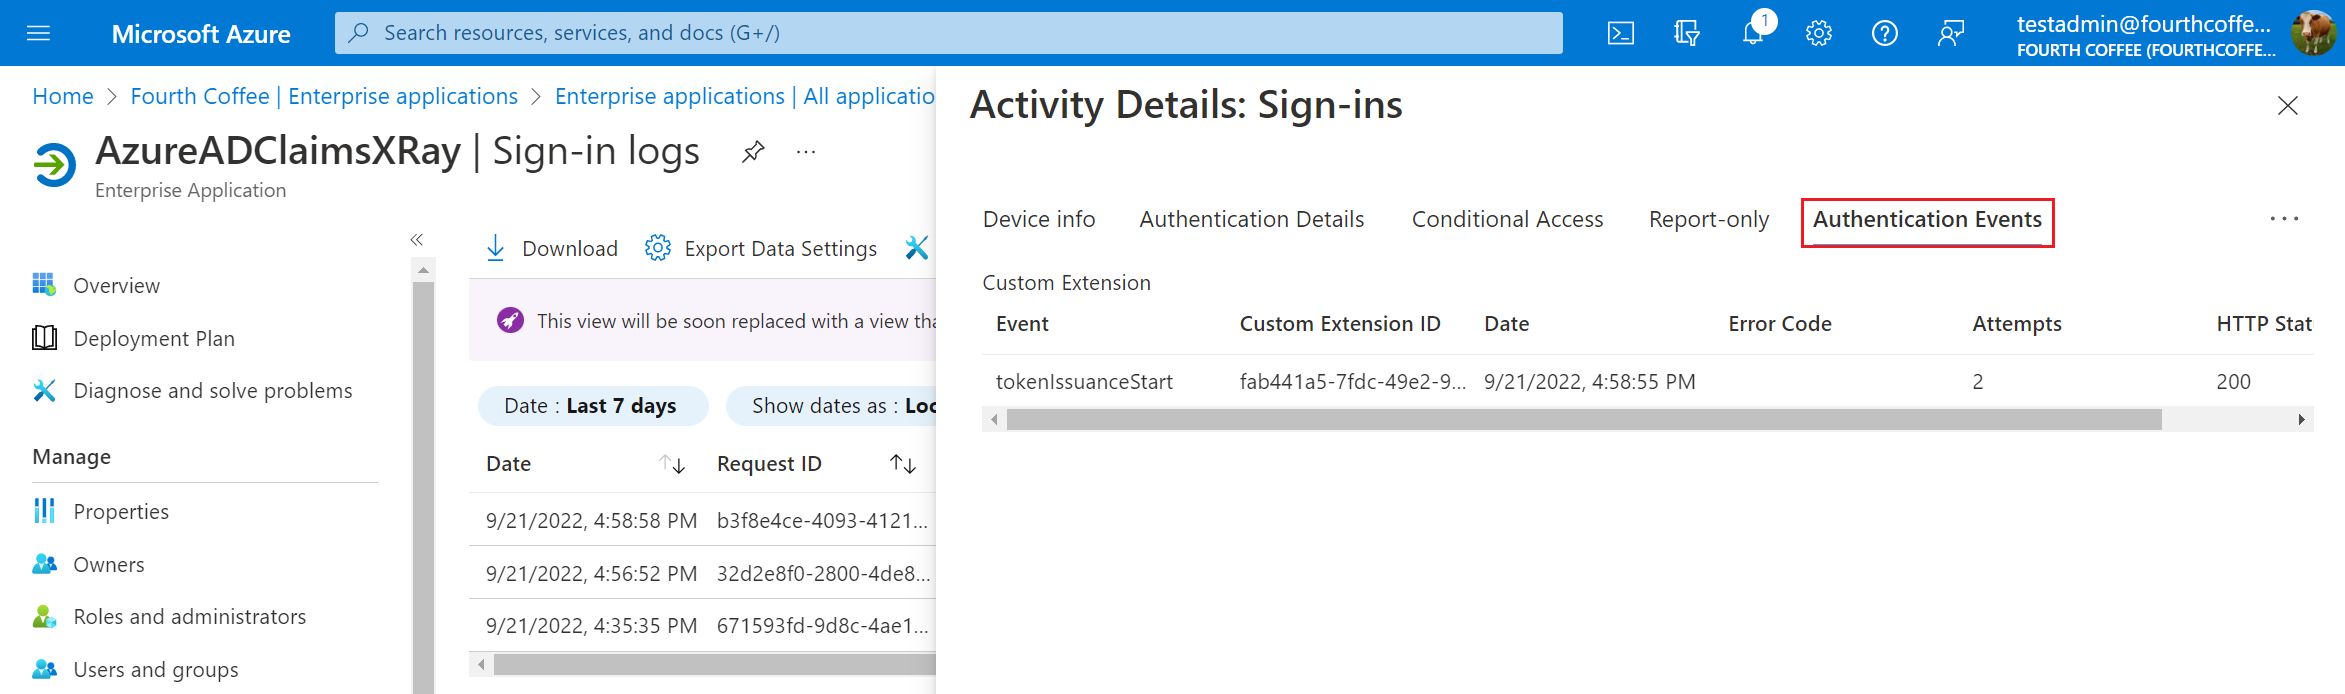 Screenshot that shows the authentication events information.